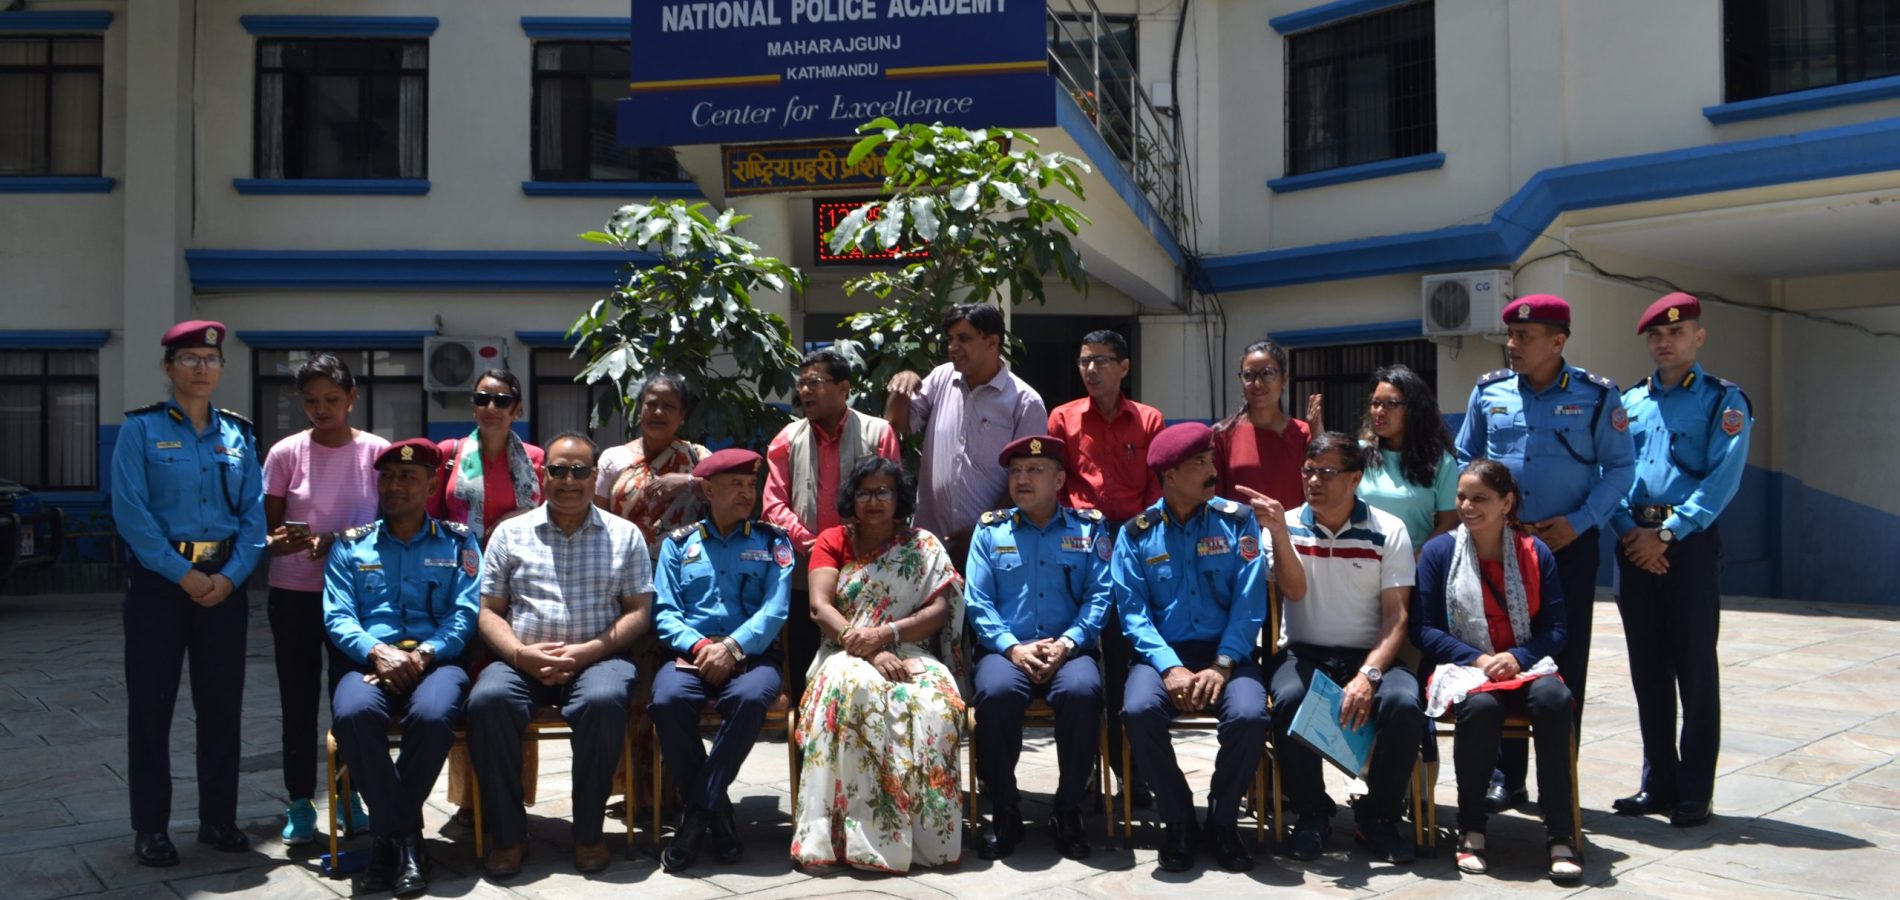 DHRC team in National Police Academy